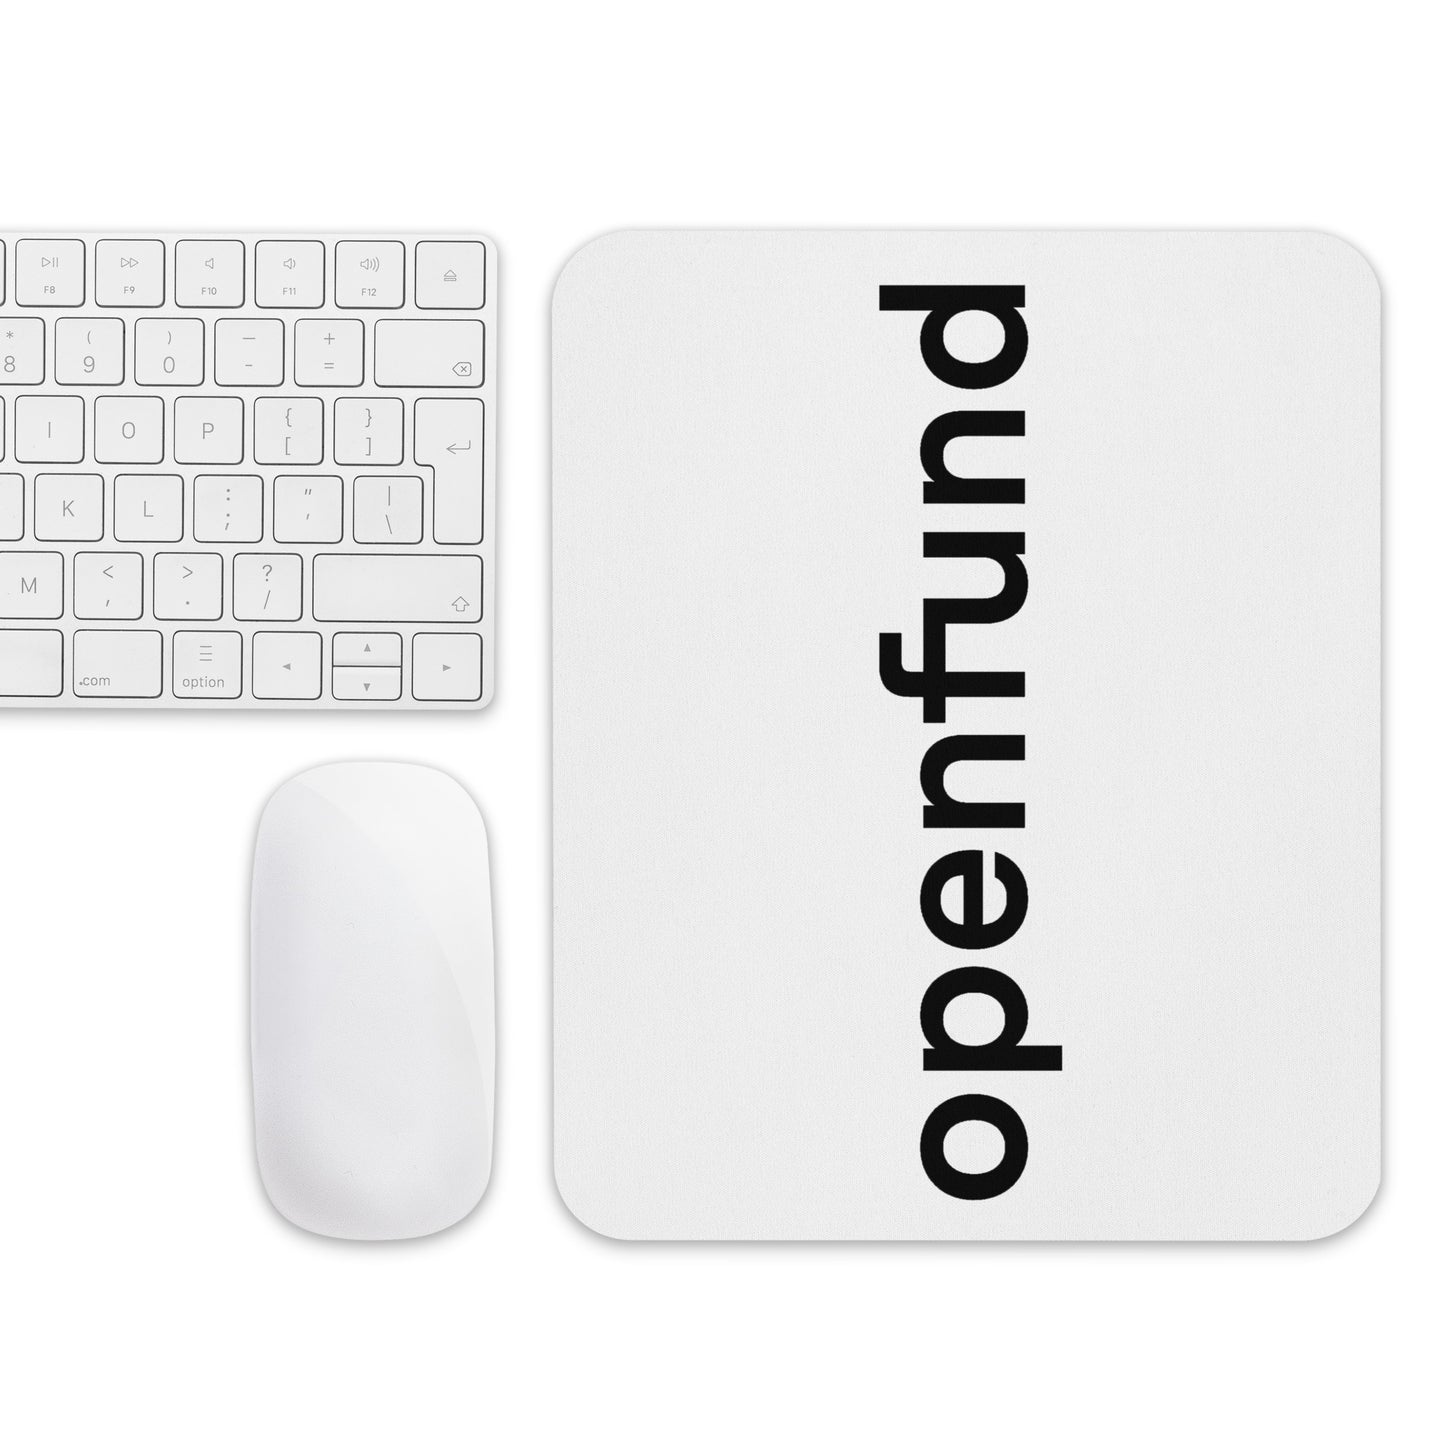 OpenFund Mouse pad